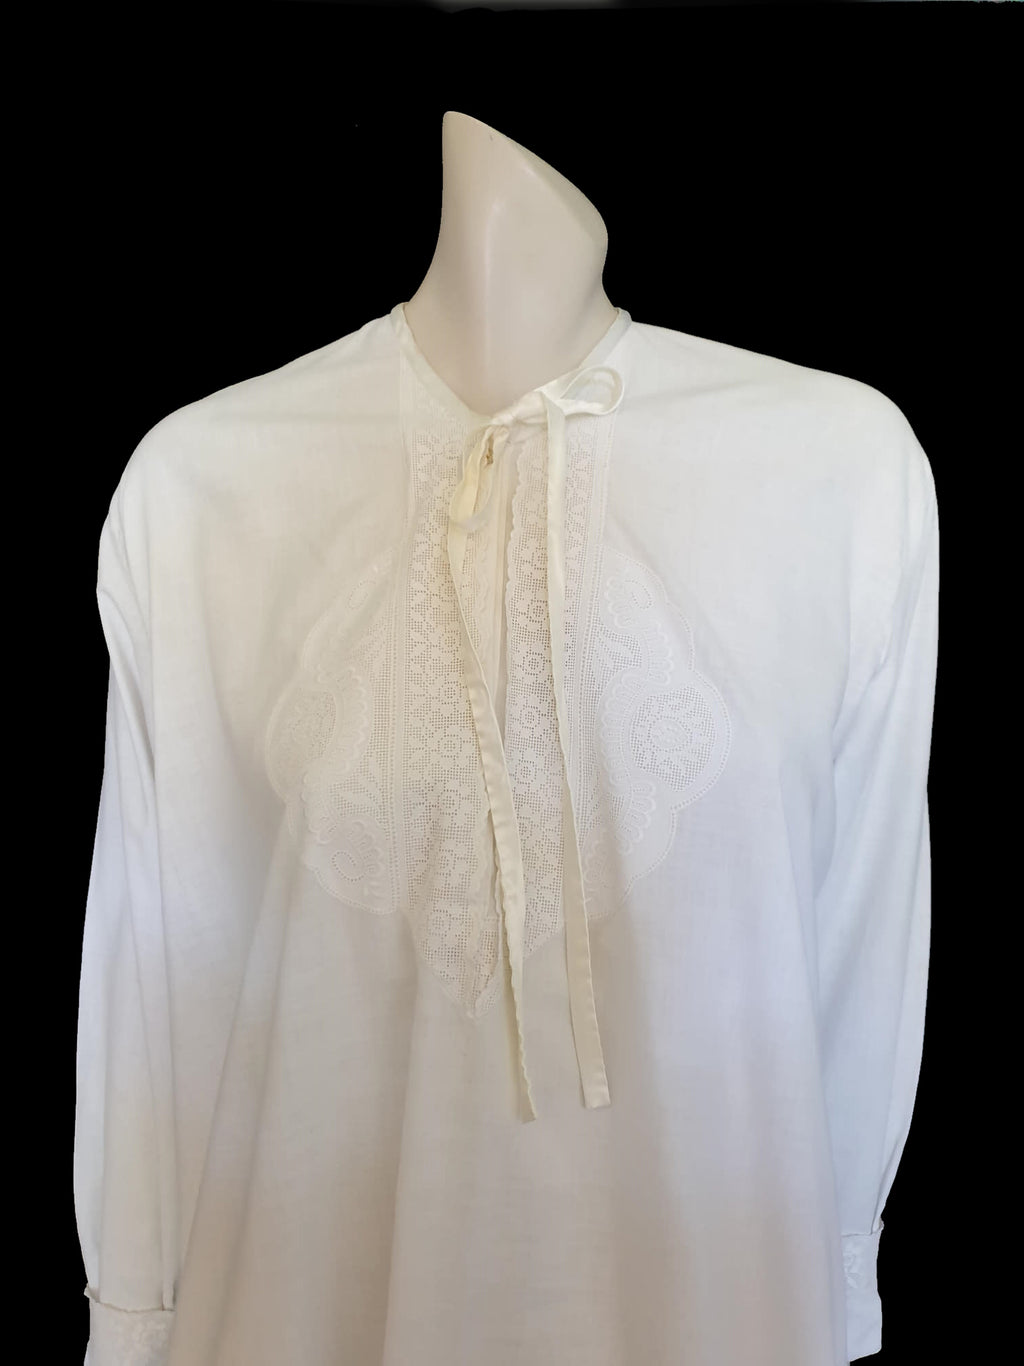 Antique edwardian white cotton nightgown with filet lace and embroidery detail medium